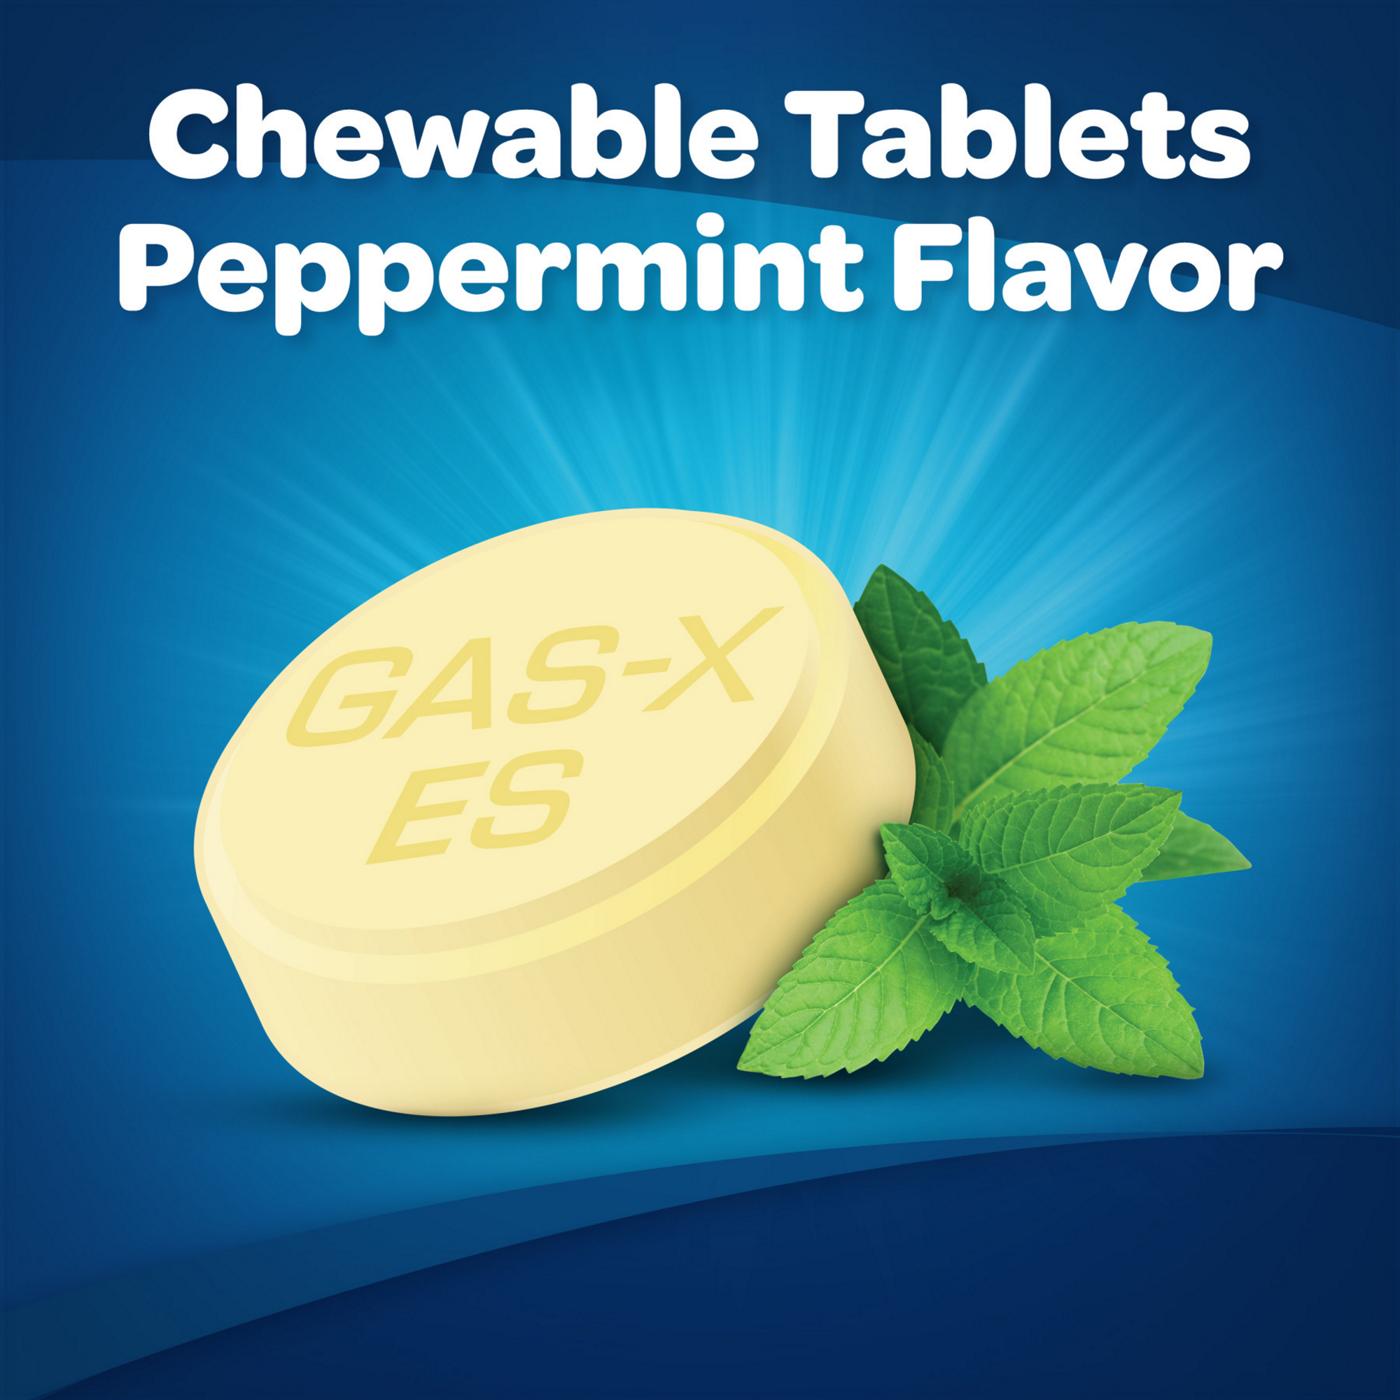 Gas-X Extra Strength Gas Relief Chewable Tablets - Peppermint Creme; image 2 of 7